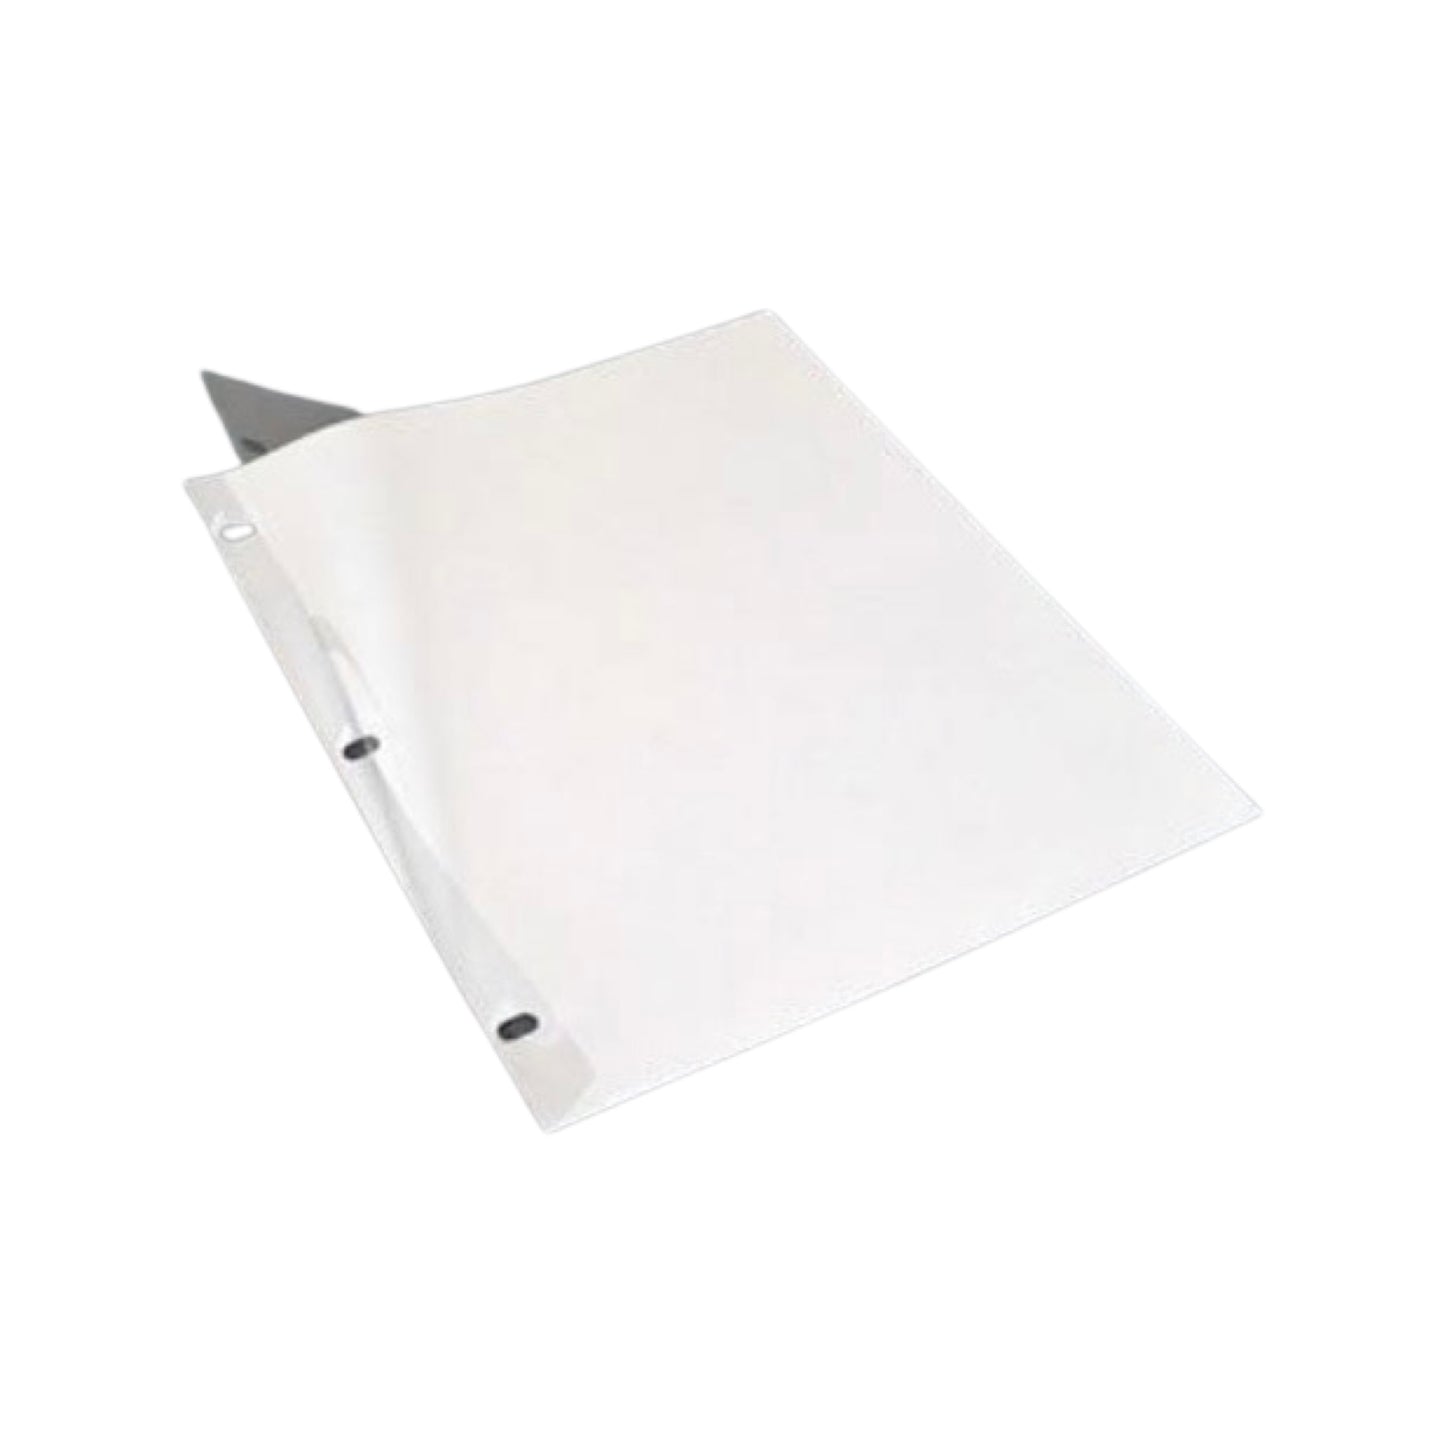 Ring Binder Photo Album Inserts | Twelve Archival Pages | Charing Cross